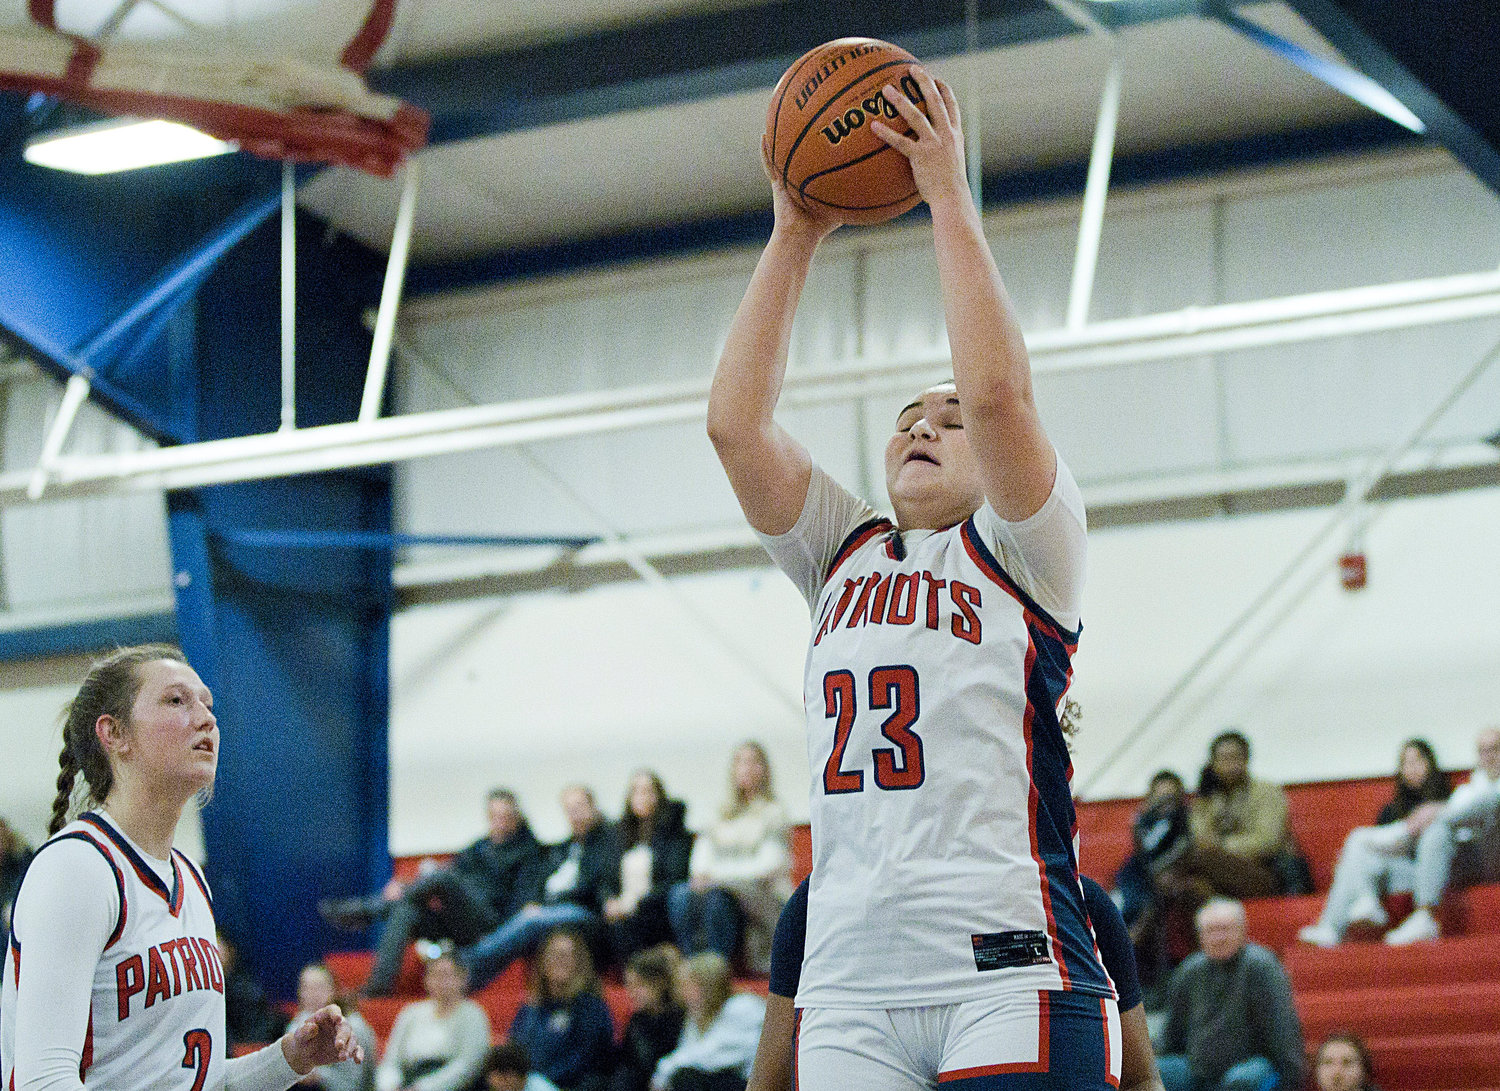 Emily Maiato grabs a rebound during the second half of Monday’s game against Barrington.